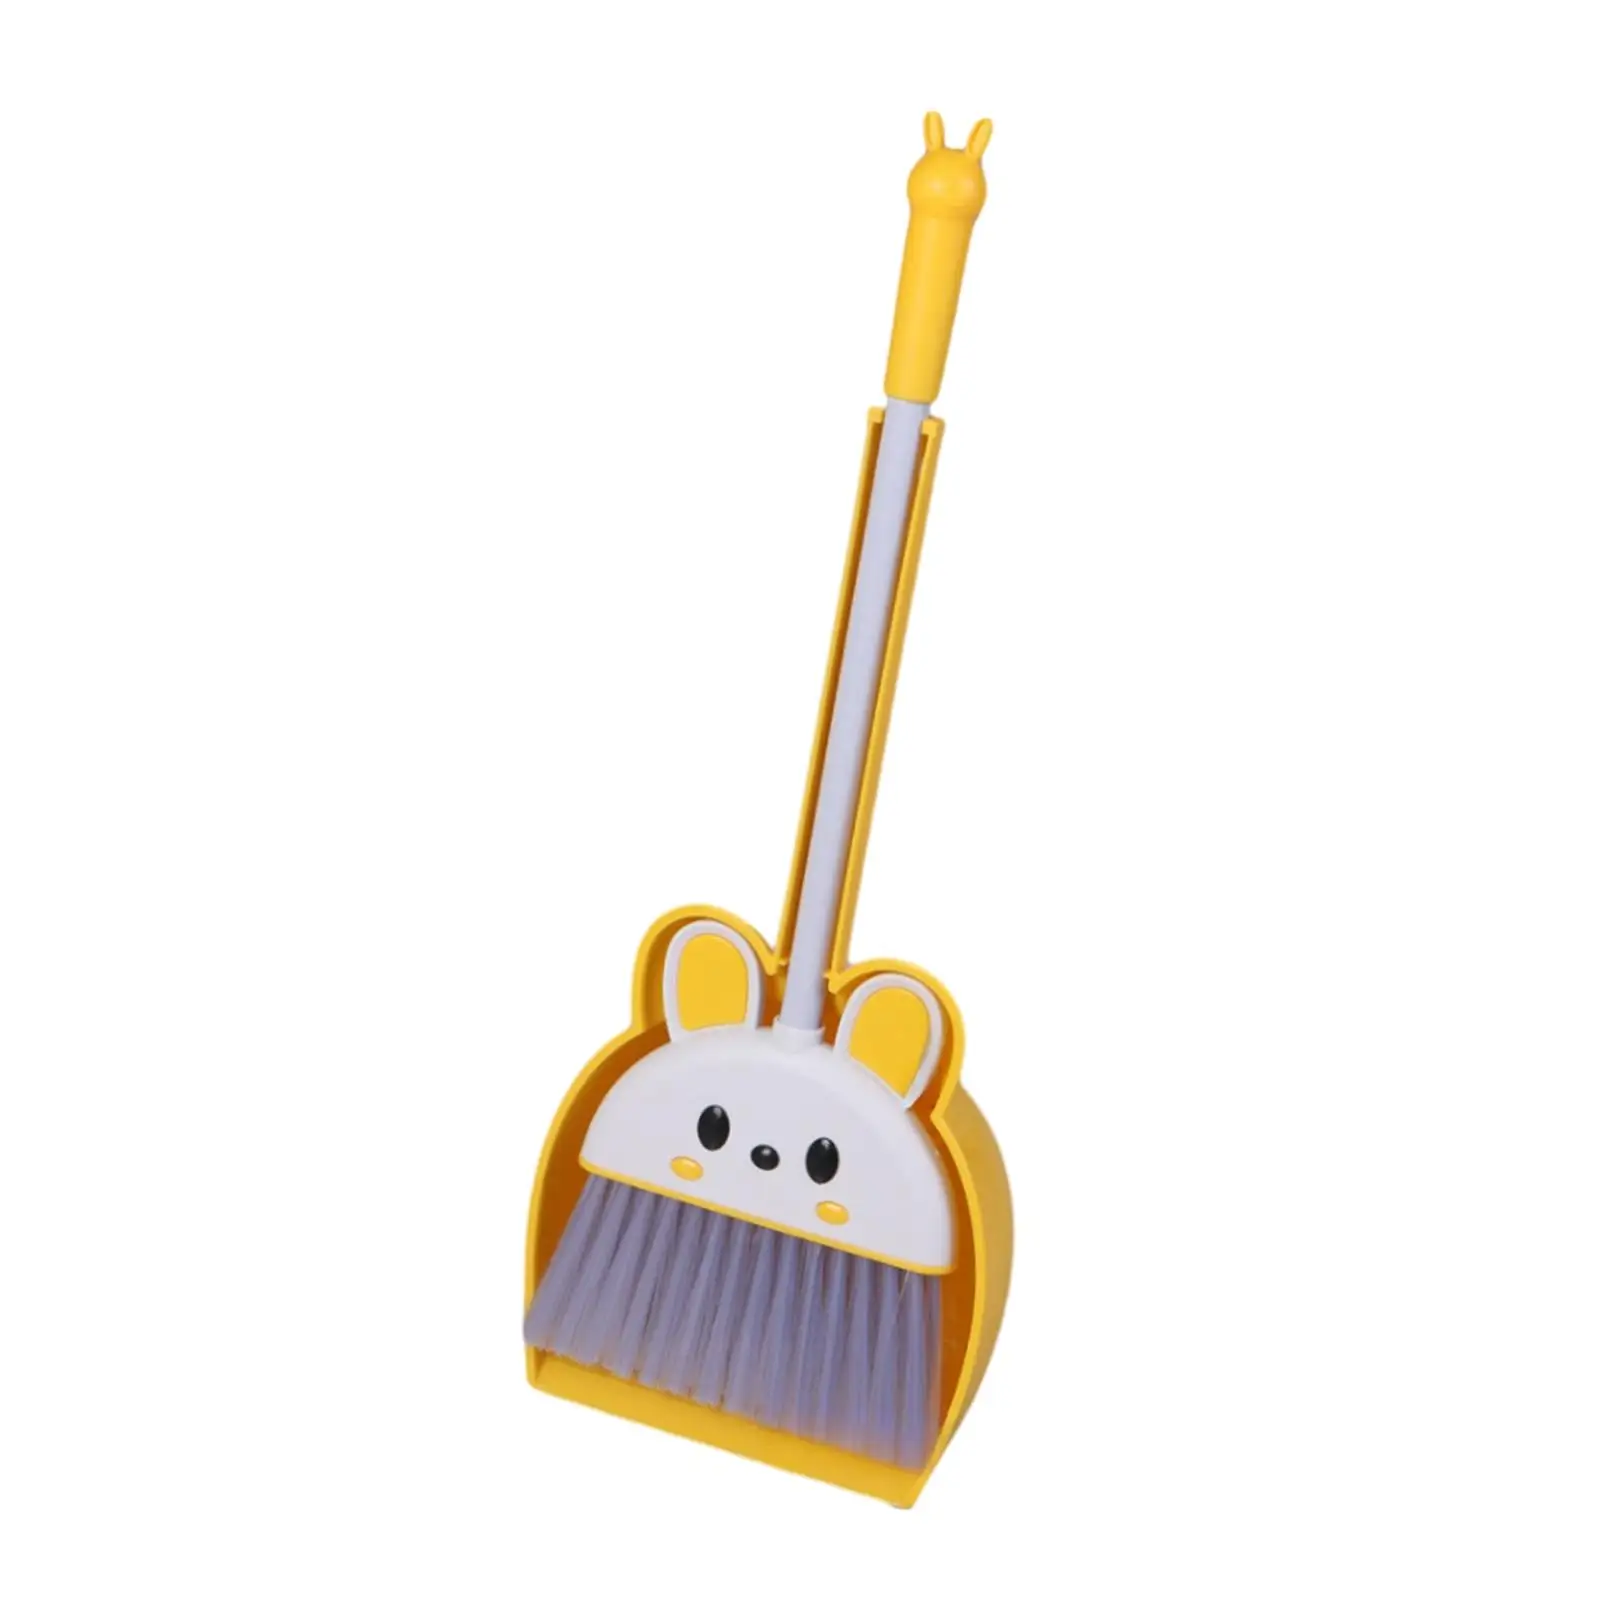 Housekeeping Pretend Play Cleaning Tools Holiday Gifts Role Playing Mini Broom with Dustpan for Kids for Kindergarten Age 3-6